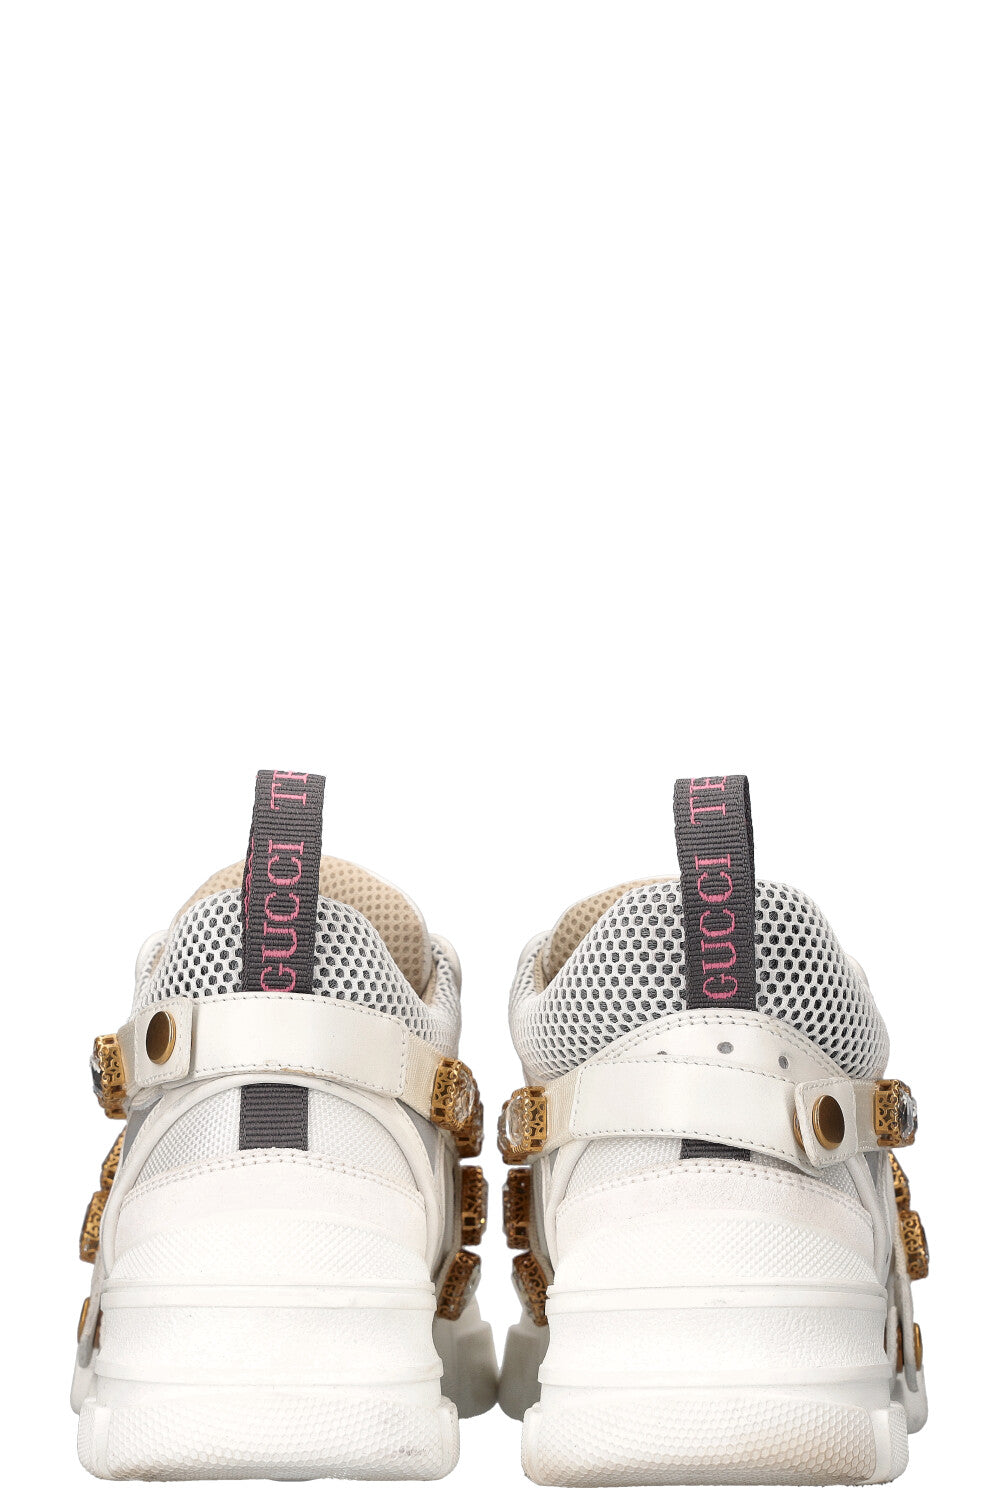 GUCCI Flashtrek Sneakers Crystals White